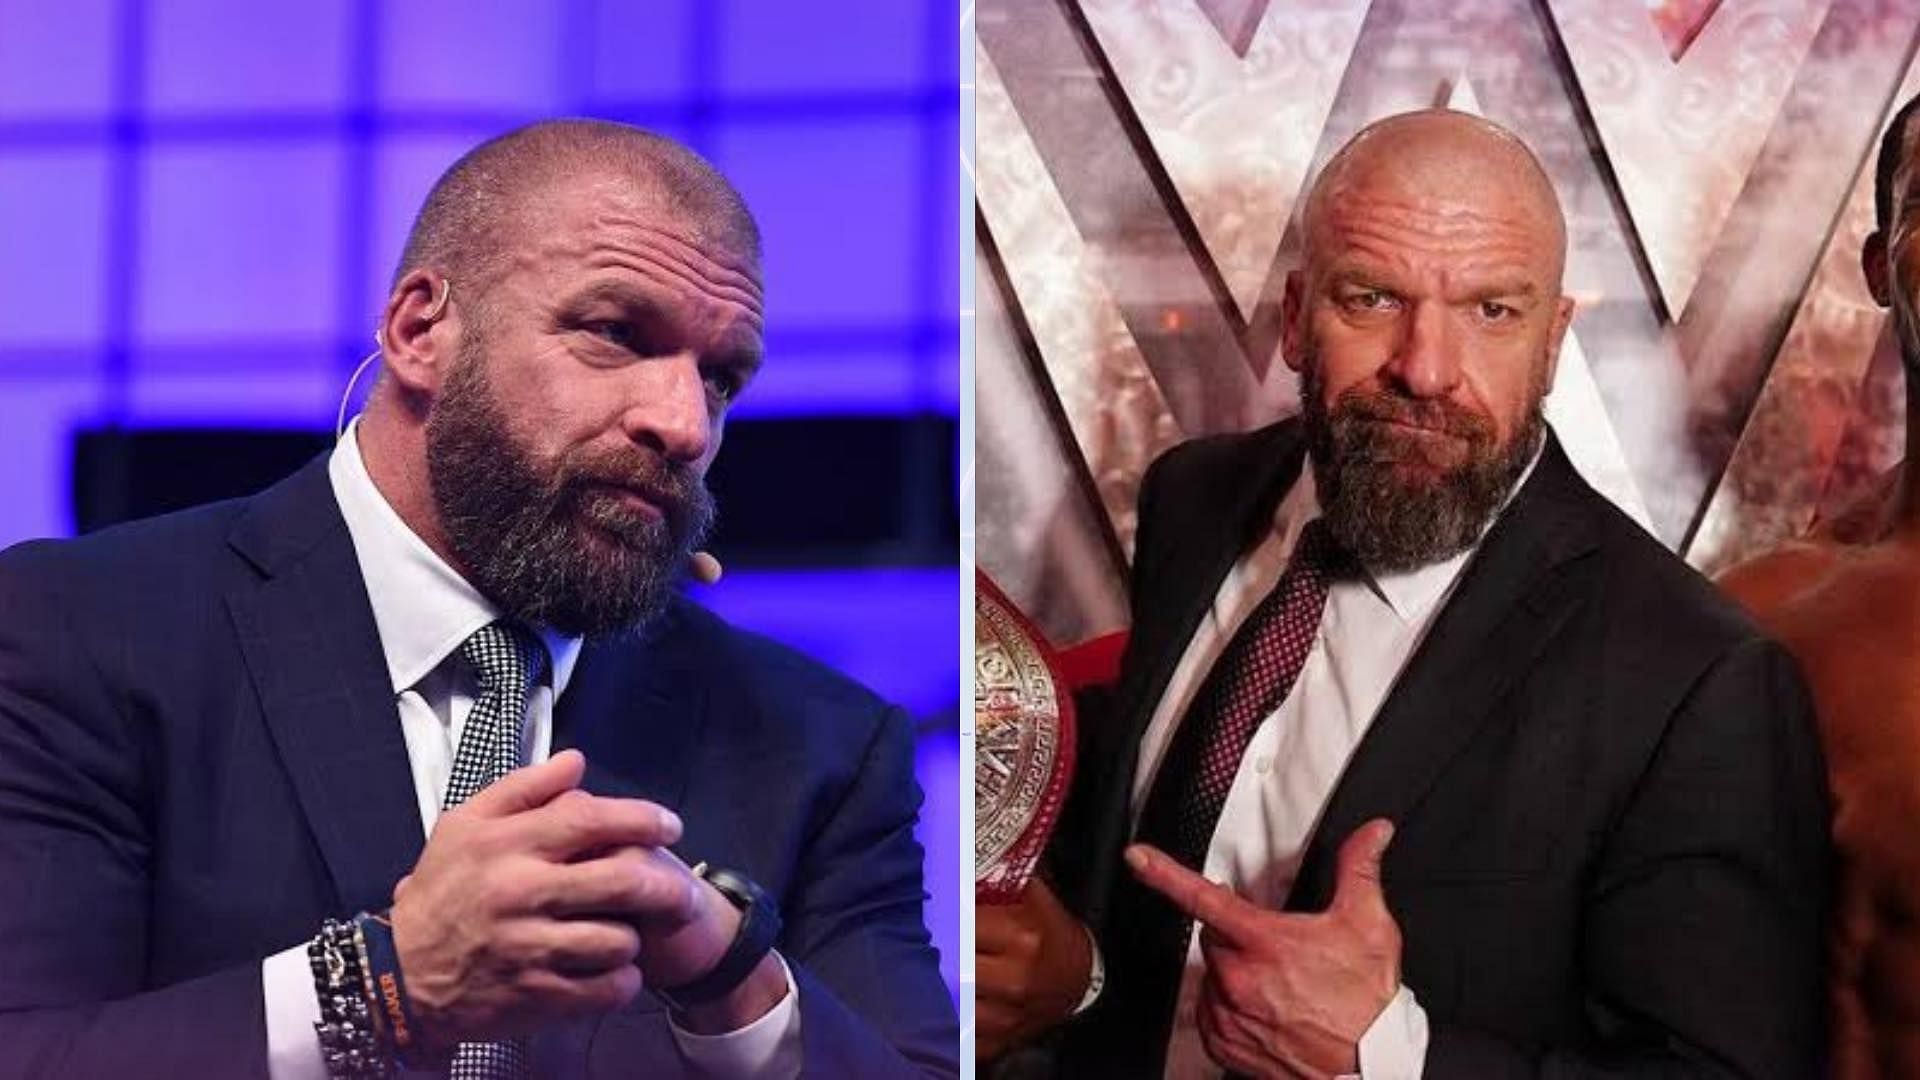 Triple H is currently the CCO of WWE